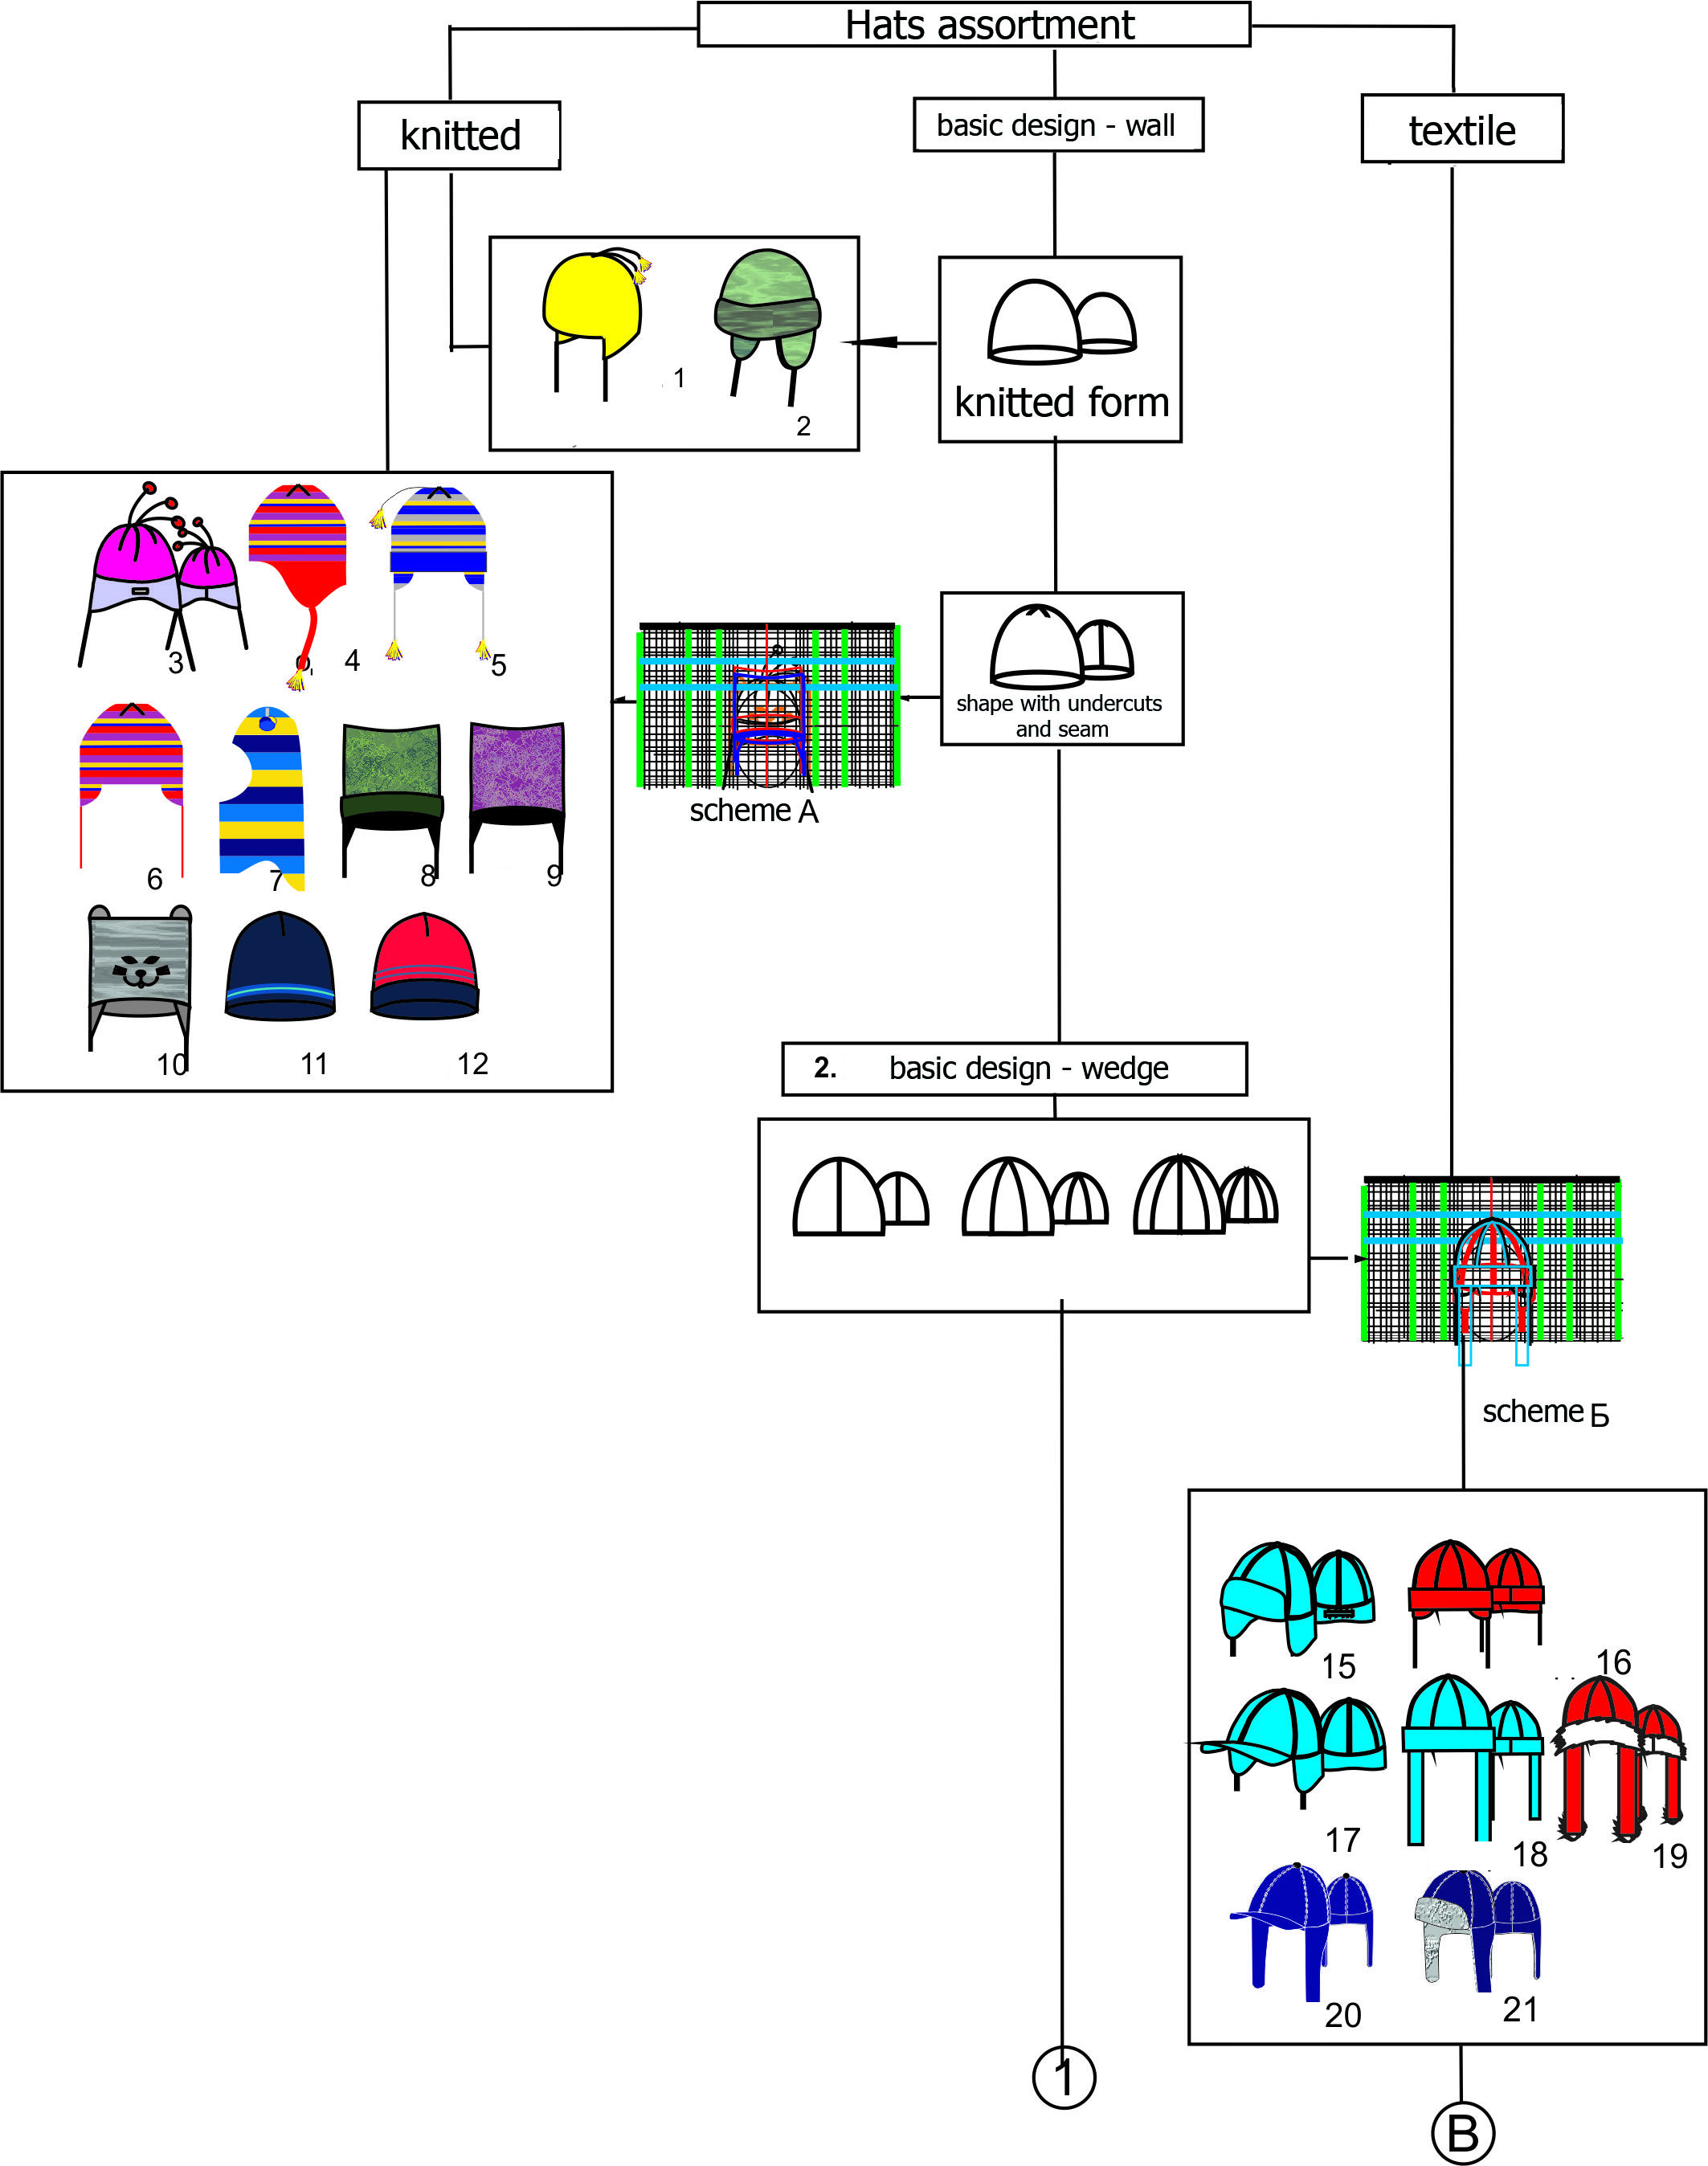 Design of new products and product range of hats (on the example of hats for a teenage group) (drawn in Corel Draw)